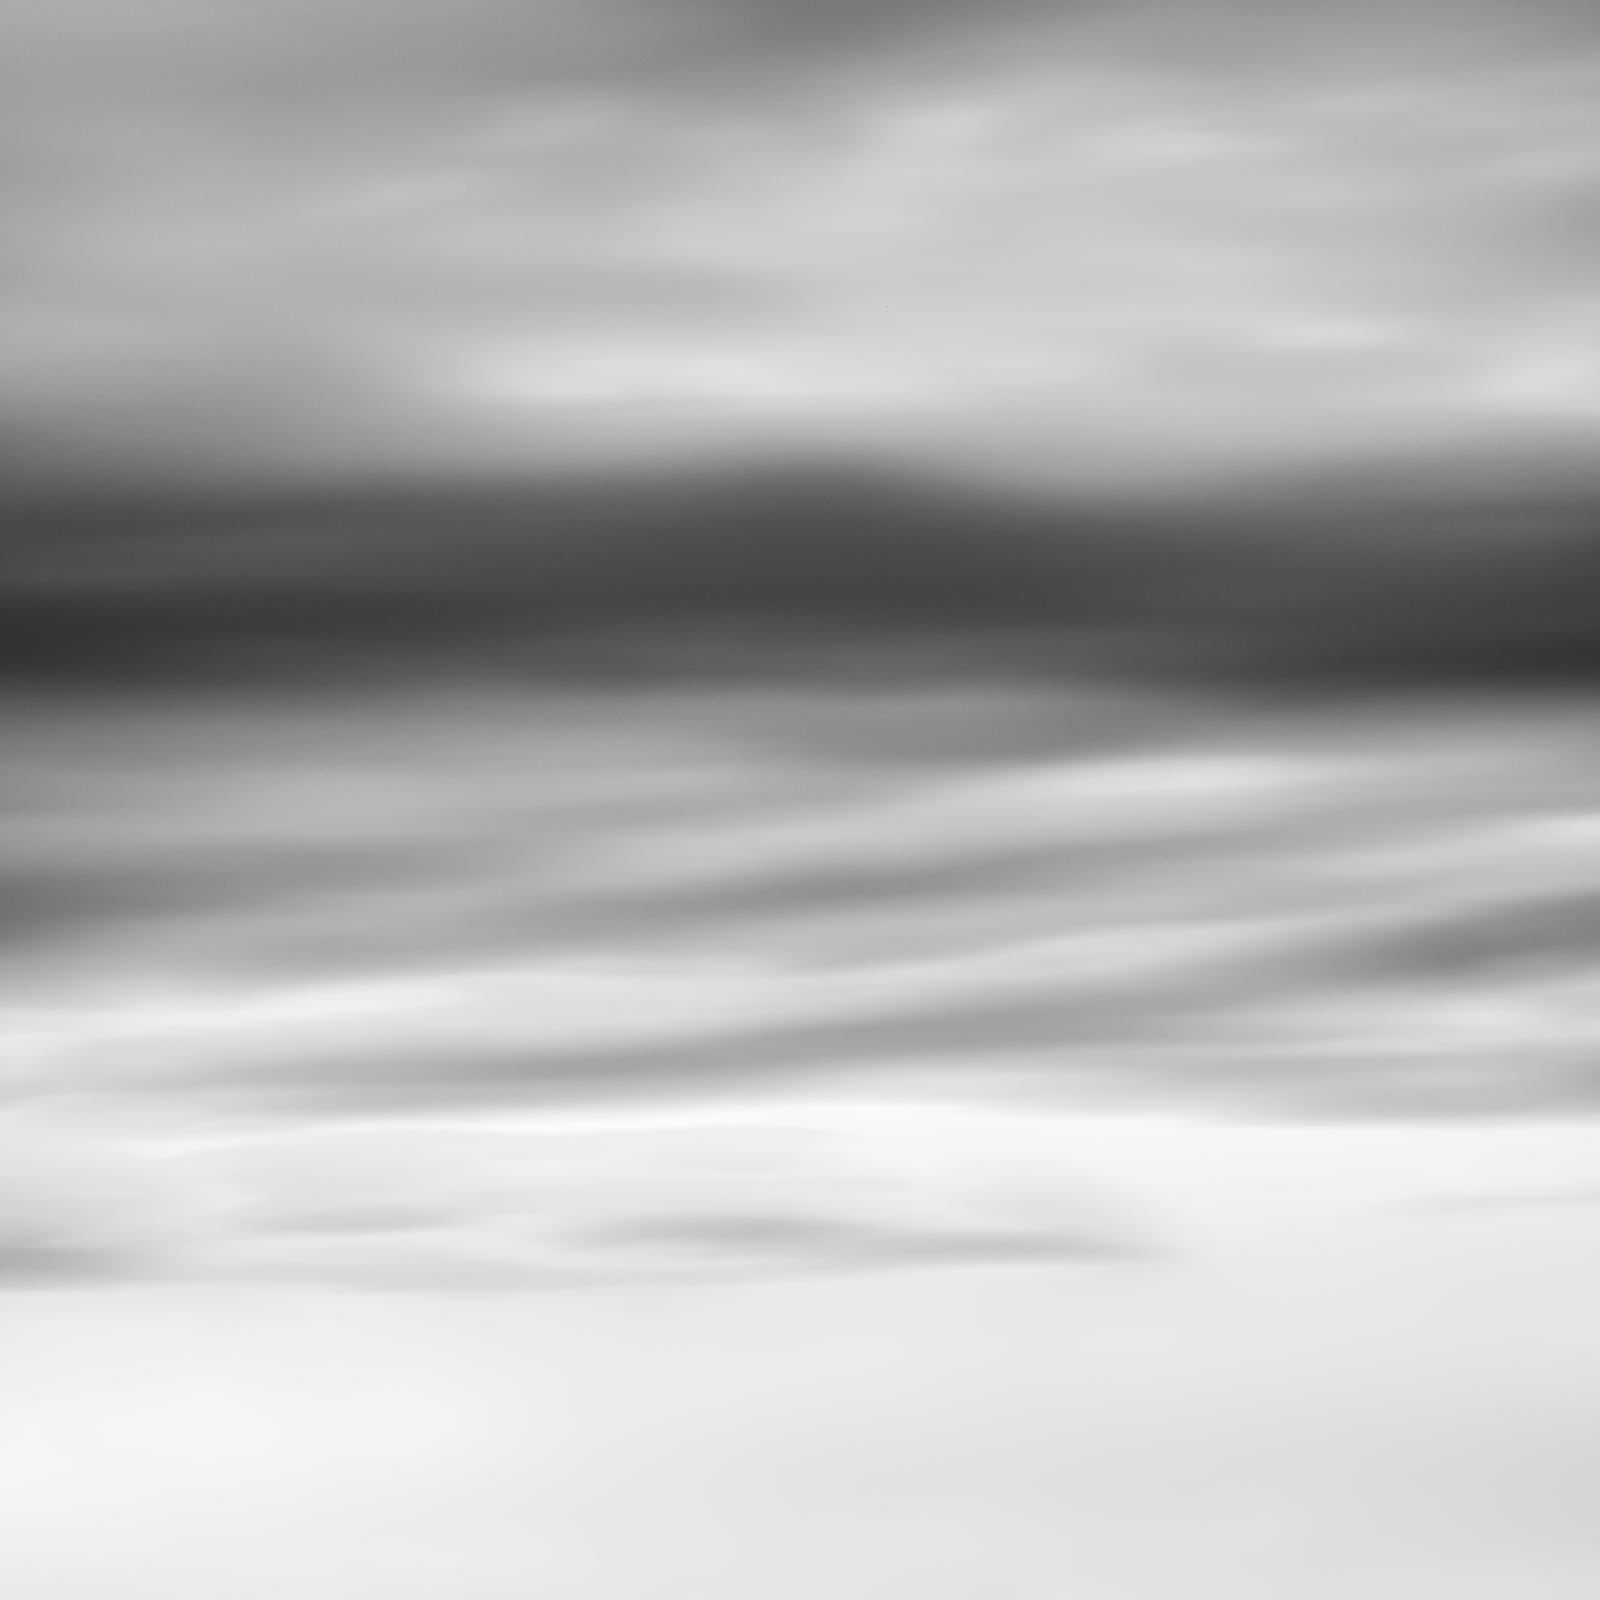 Swimming Area, cloudy, lake, black and white long exposure landscape photography For Sale 6